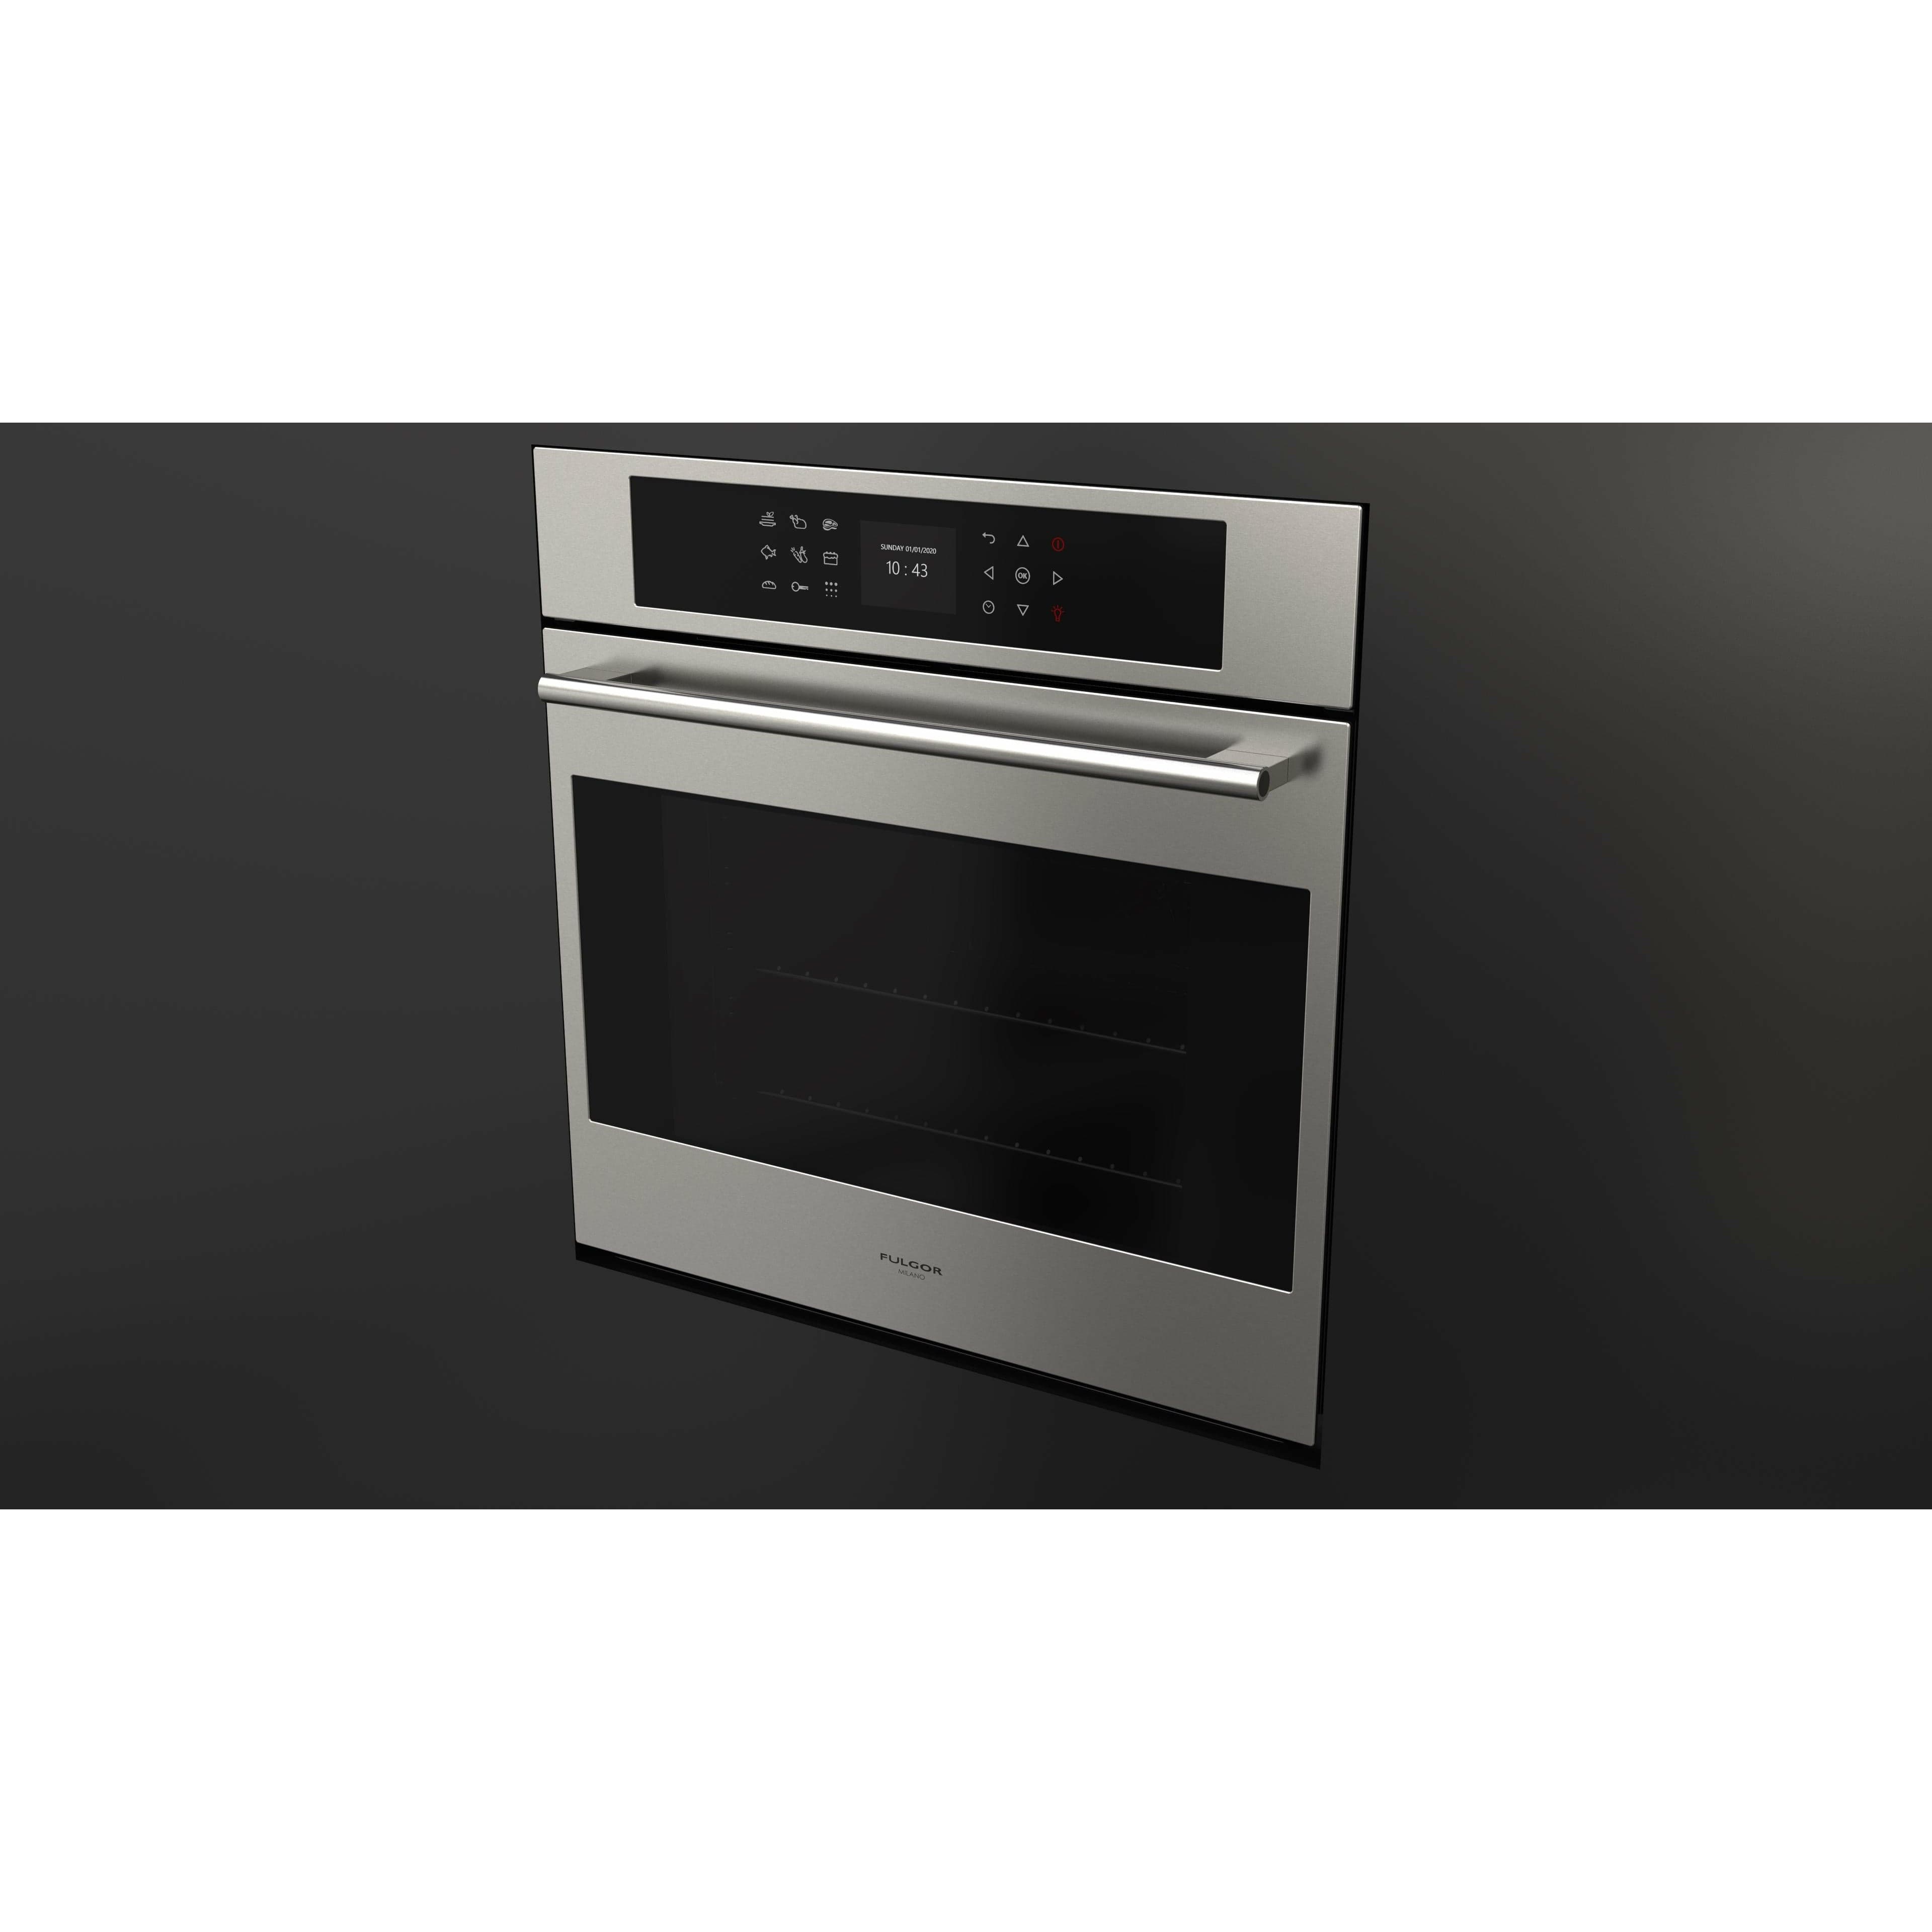 Fulgor Milano 24" Single Convection Electric Wall Oven with 2.4 Cu. Ft. Capacity - F7SP24S1 Ovens F7SP24S1 Luxury Appliances Direct